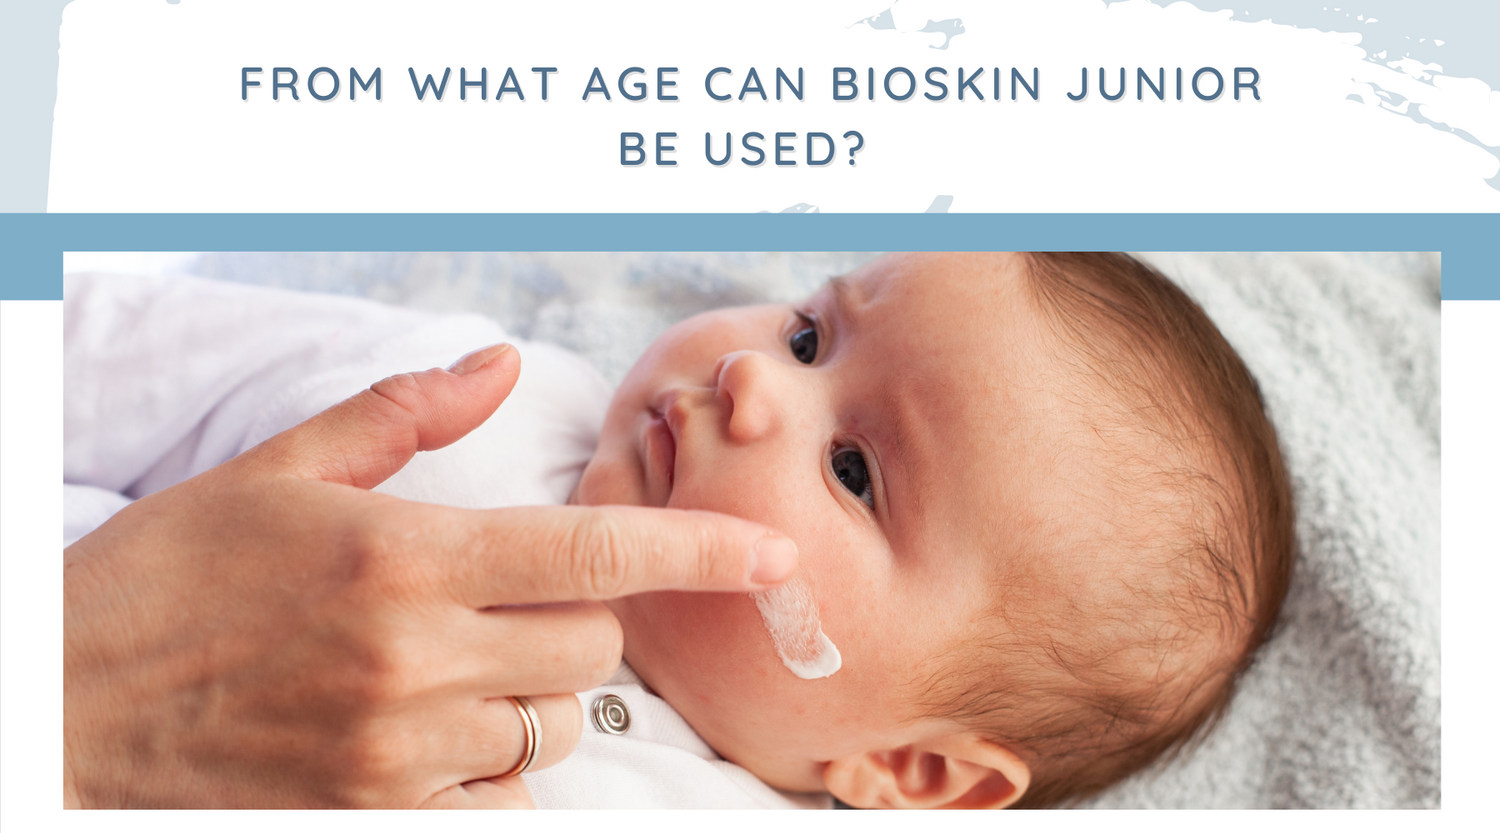 From what age can Bioskin Junior be used?